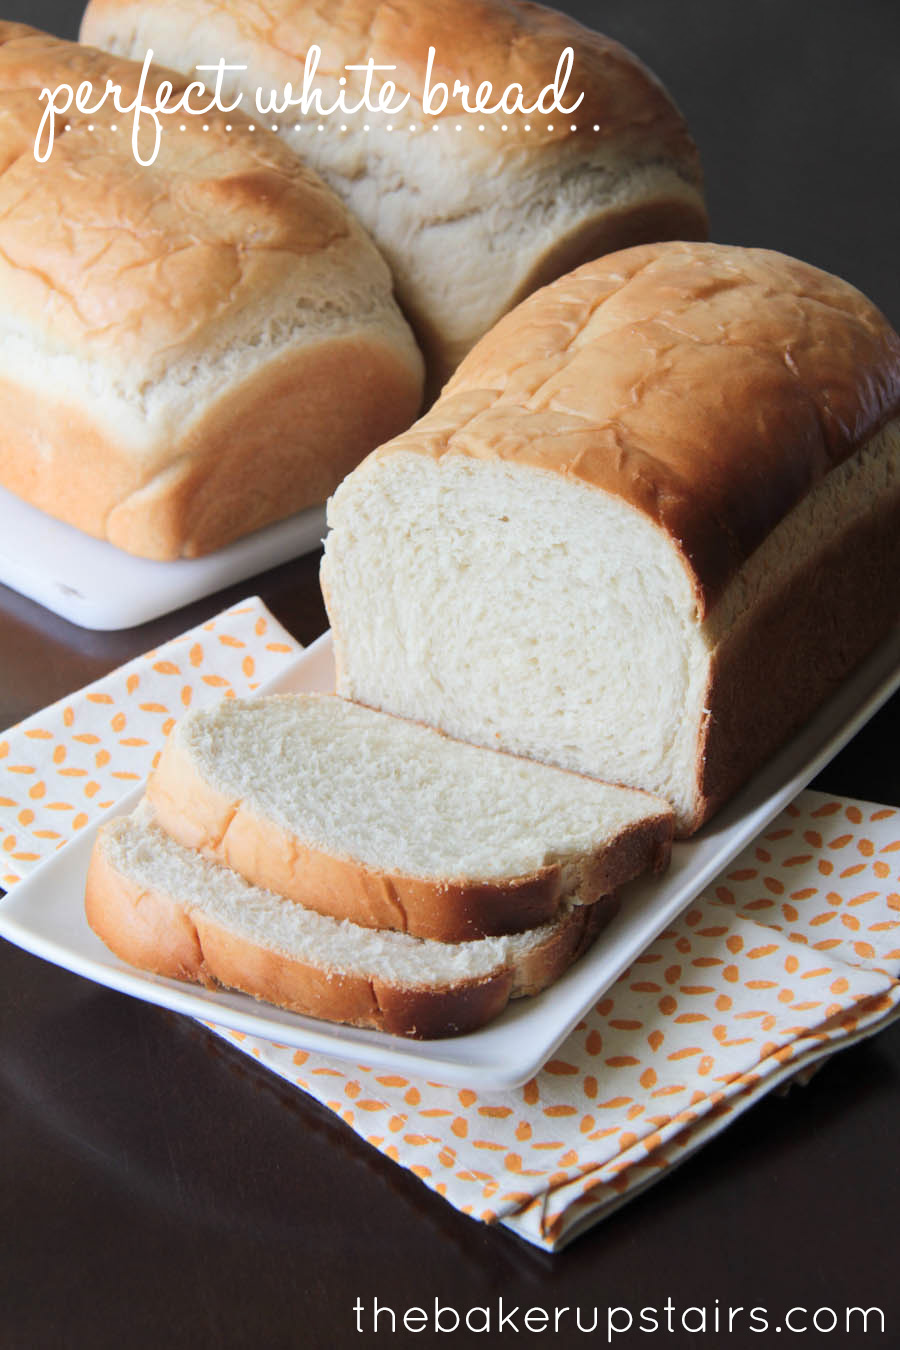 The Baker Upstairs: perfect white bread